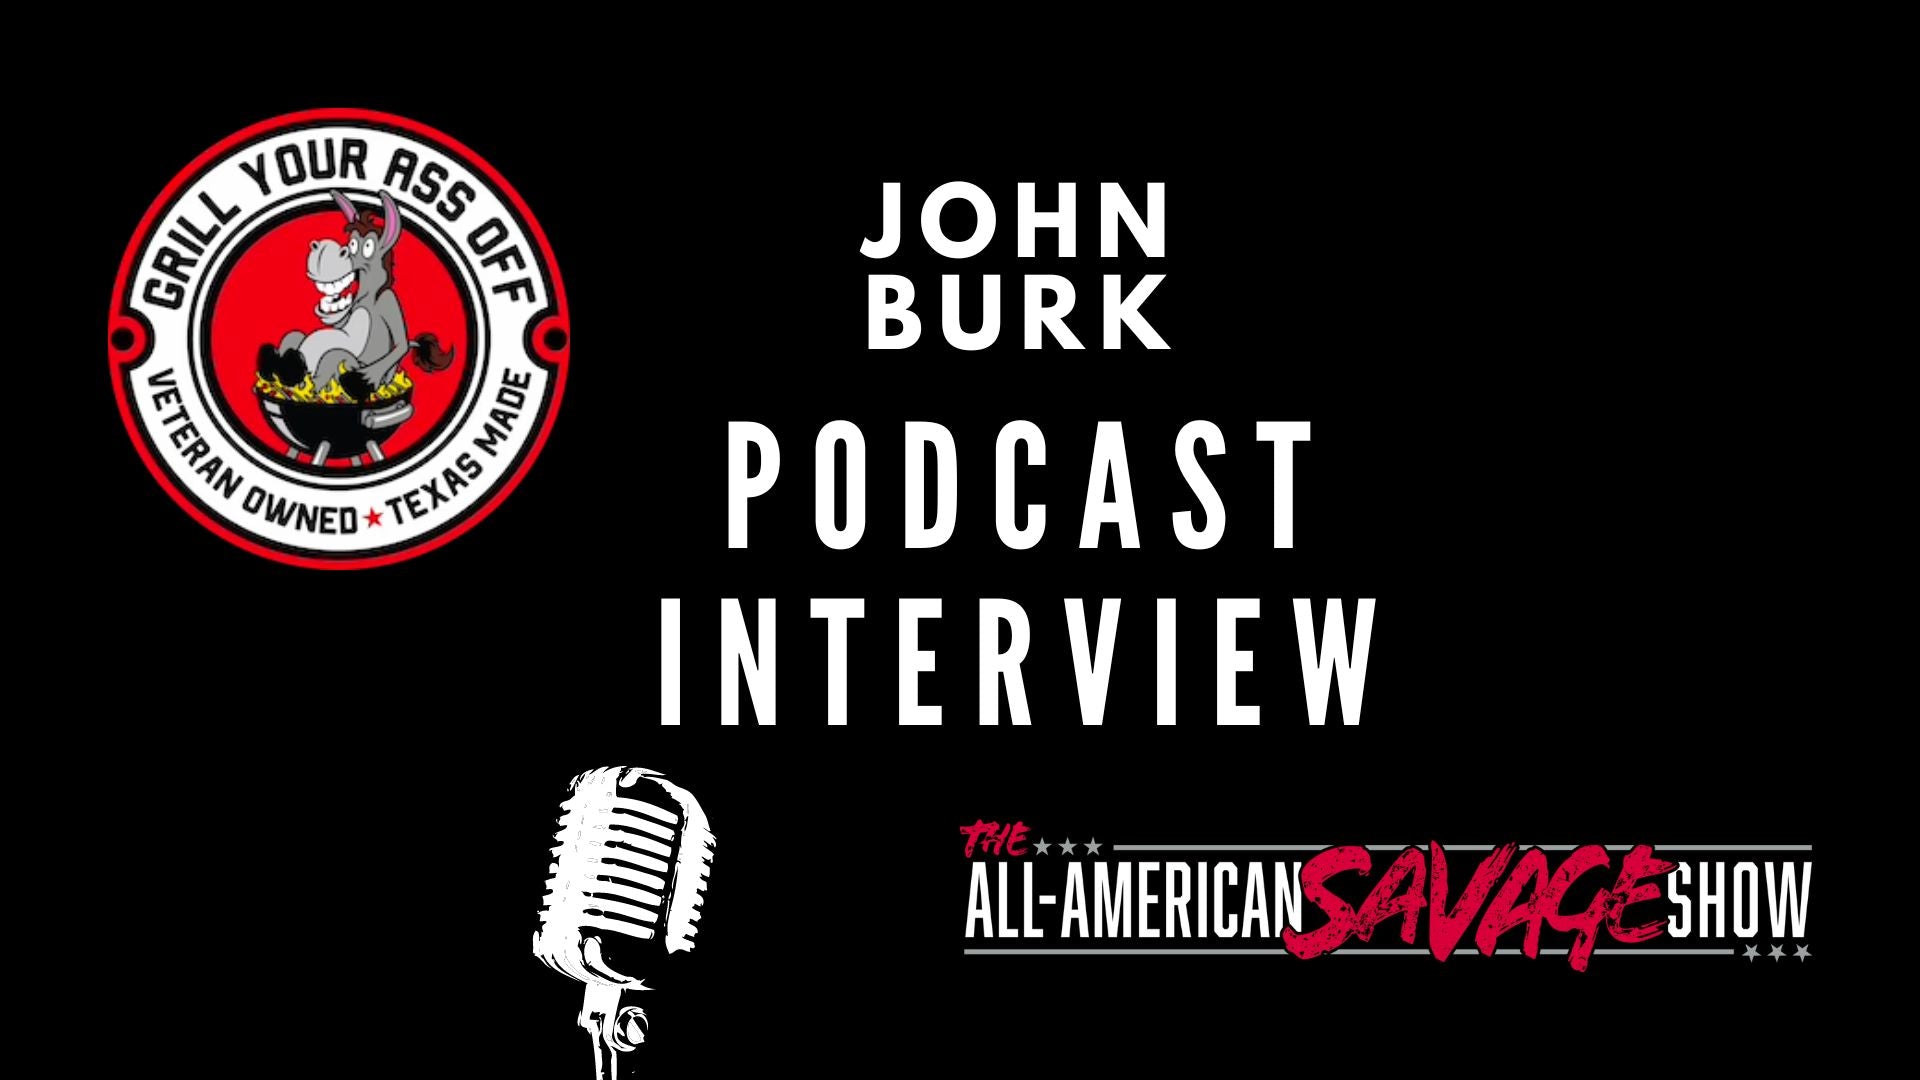 Jason's Podcast Interview with John Burk